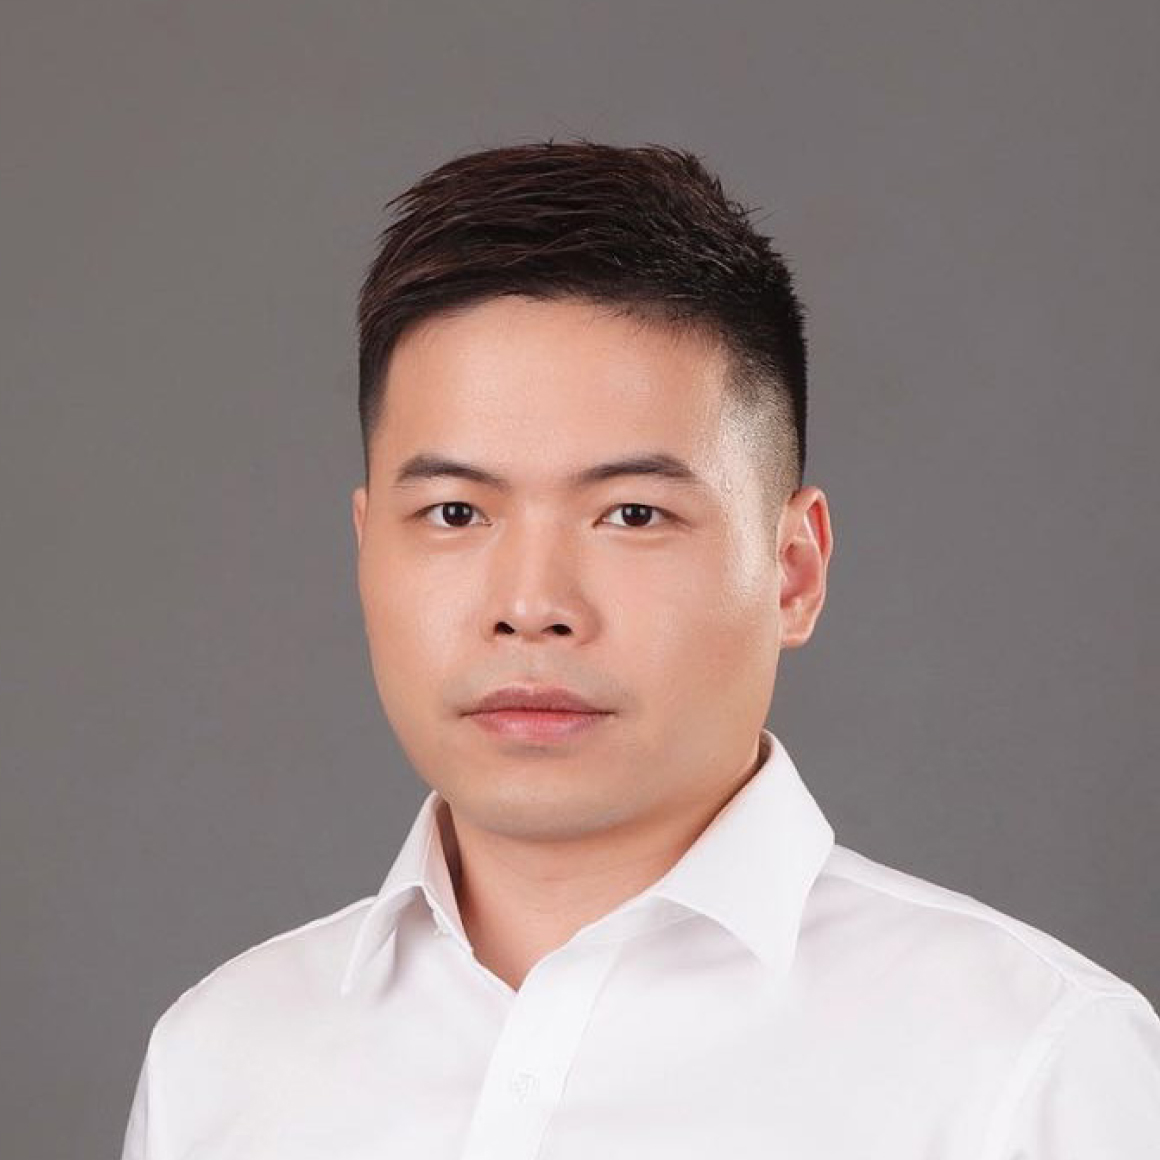 En Xie - B.S. in Computer Science and Artificial Intelligence from Imperial College London,Head of product and engineering at AI Rudder from 2021 to 2023, a leading voice AI solution for customer service in Southeast Asia,Co-founded Learnta Inc in 2016 as CTO, developed the AI learning system with large scale commercialization